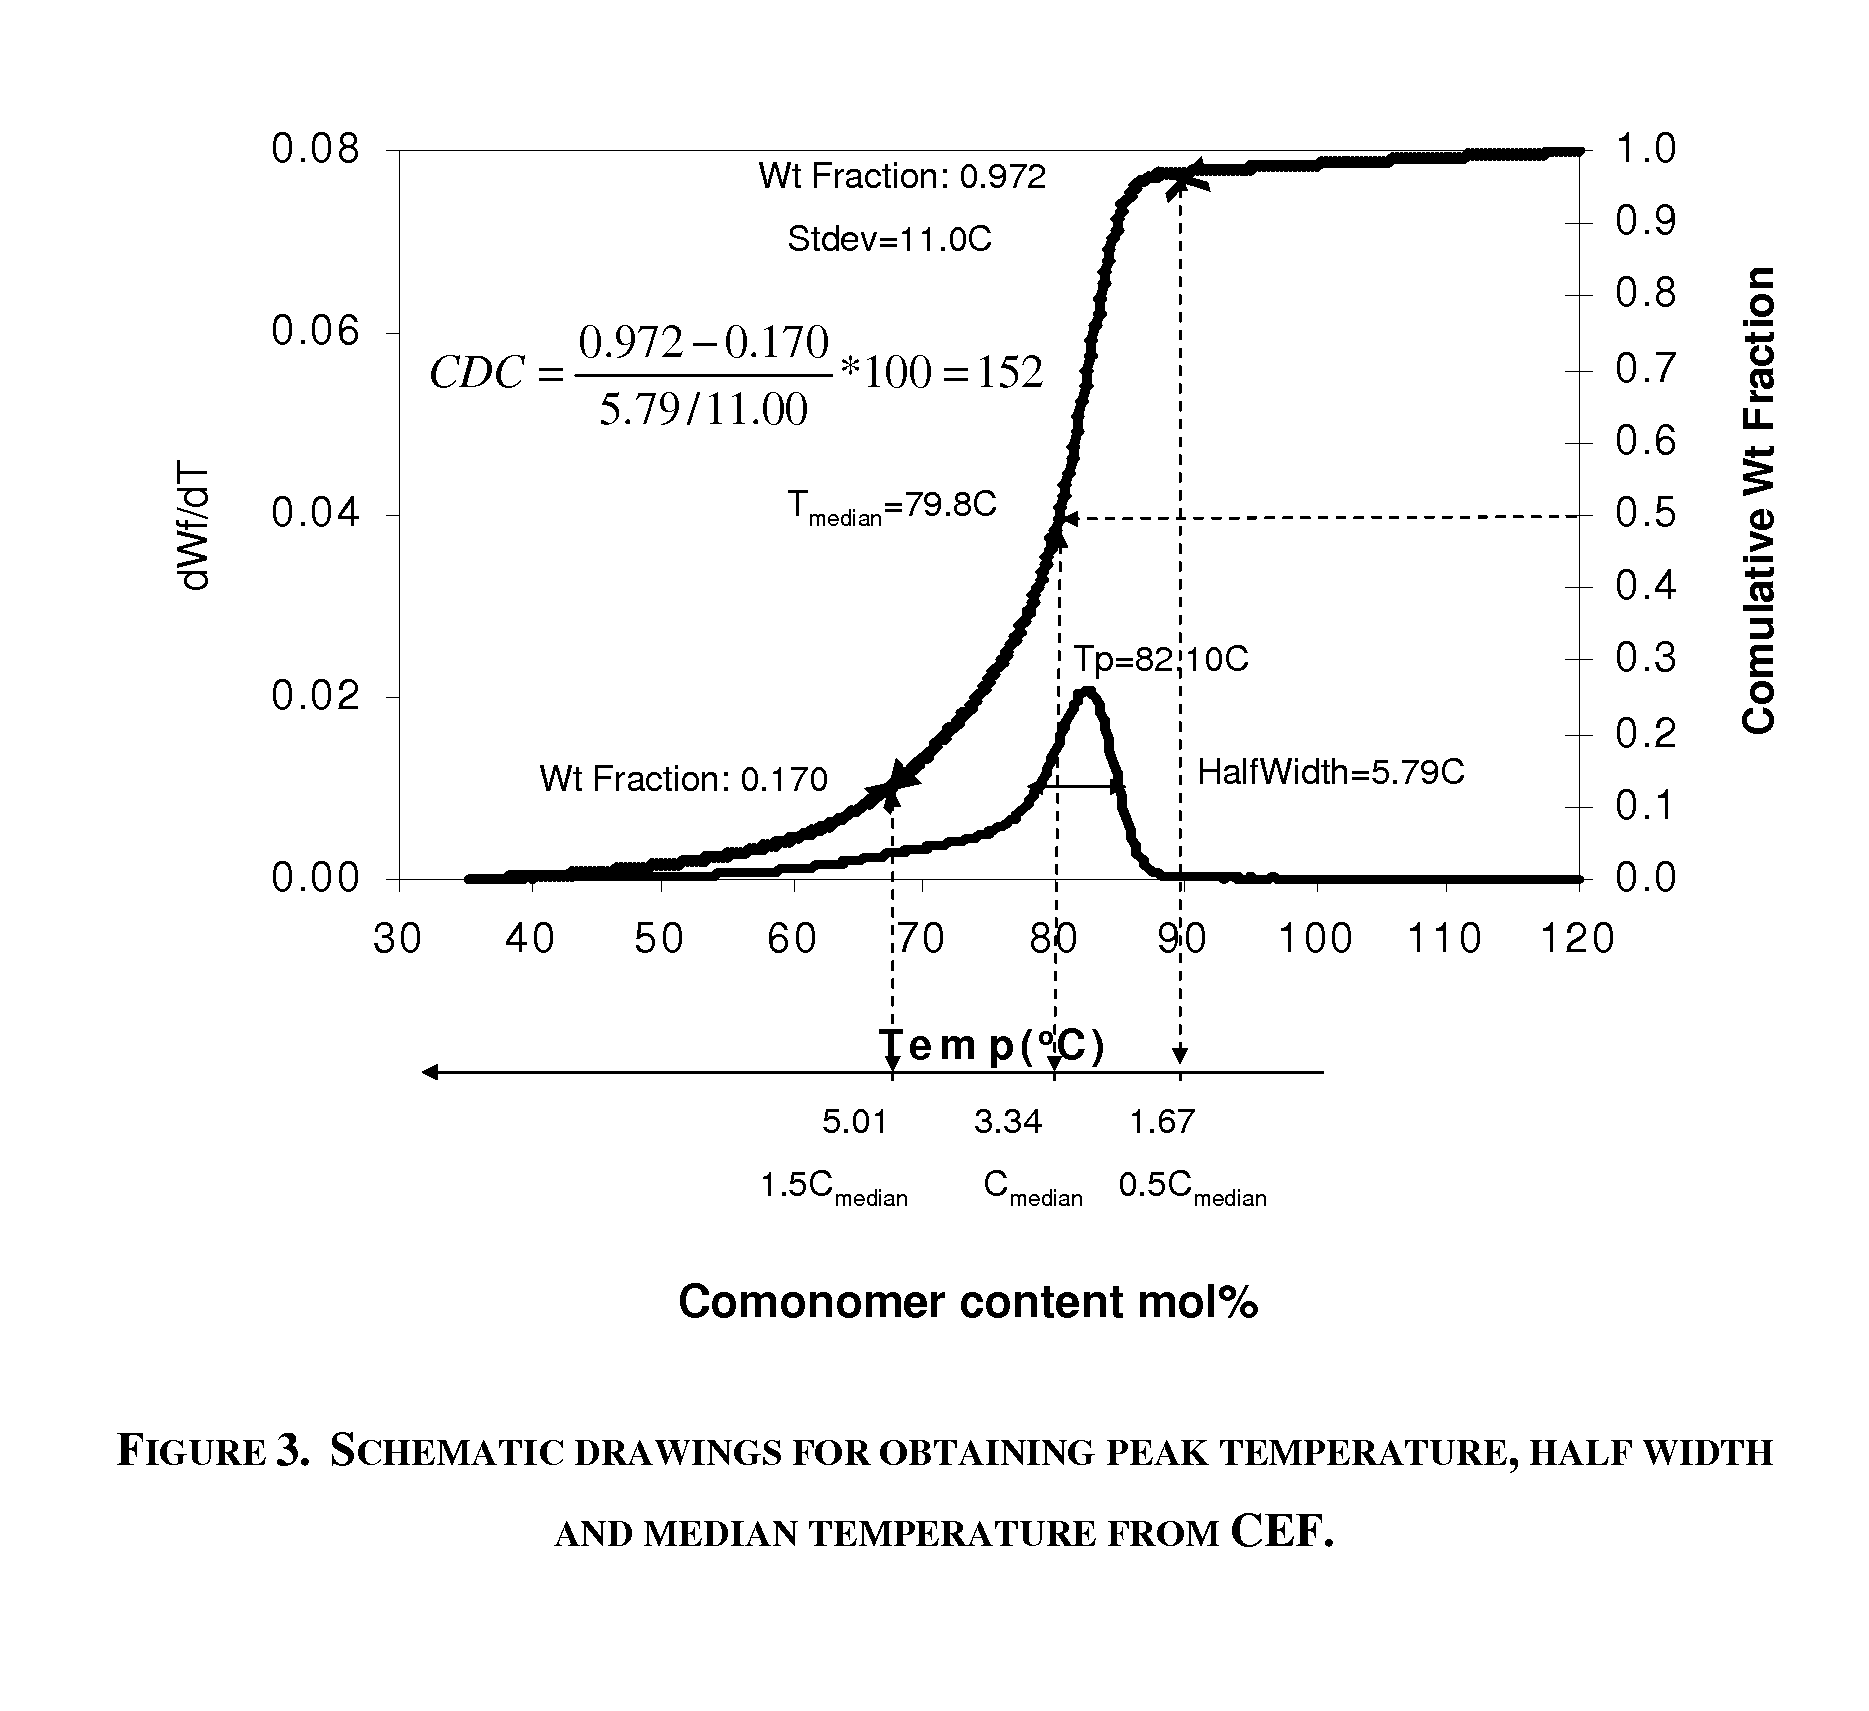 Electronic device module comprising polyolefin copolymer with low unsaturation and optional vinyl silane